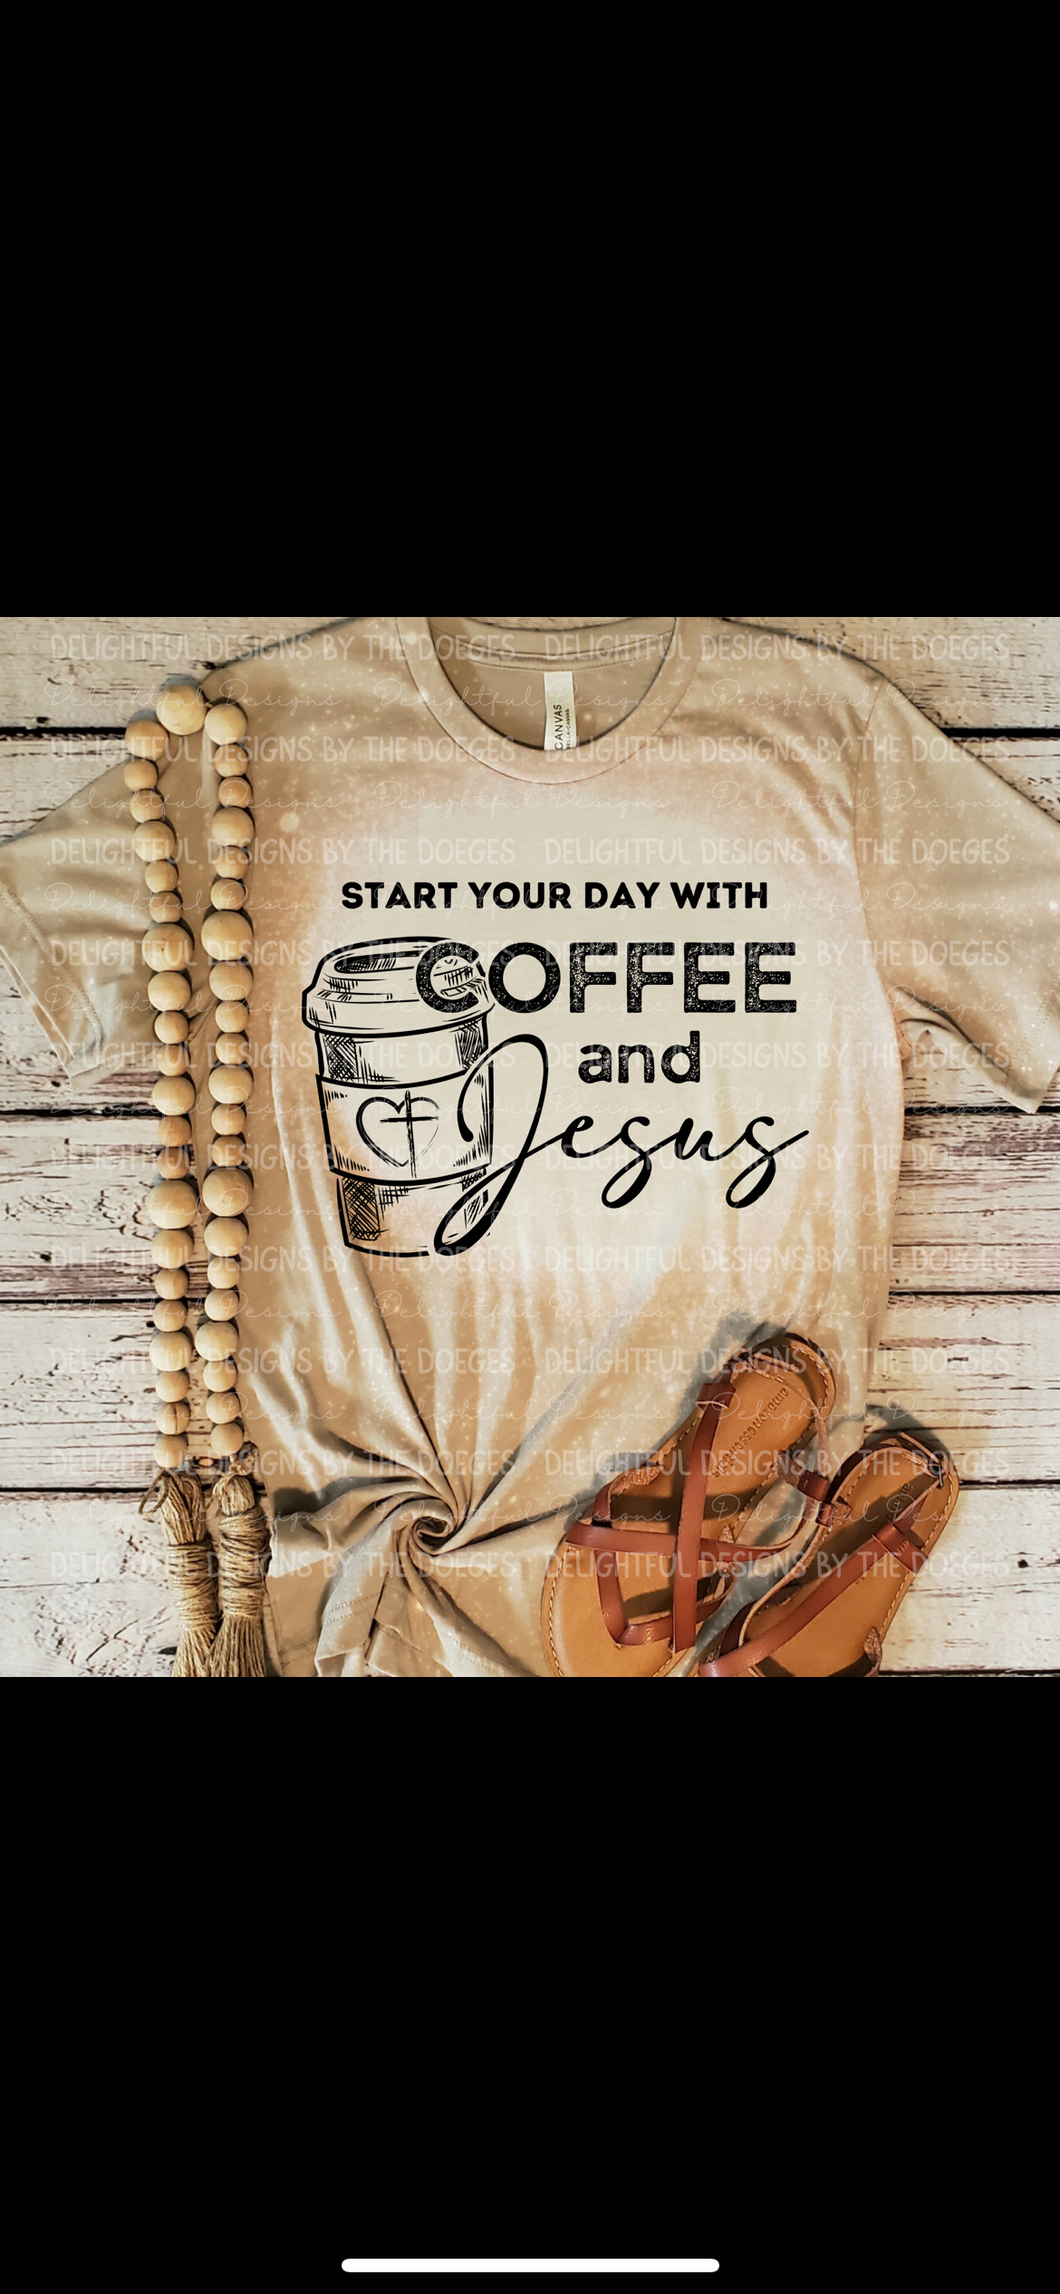 Start your day with Coffee and Jesus